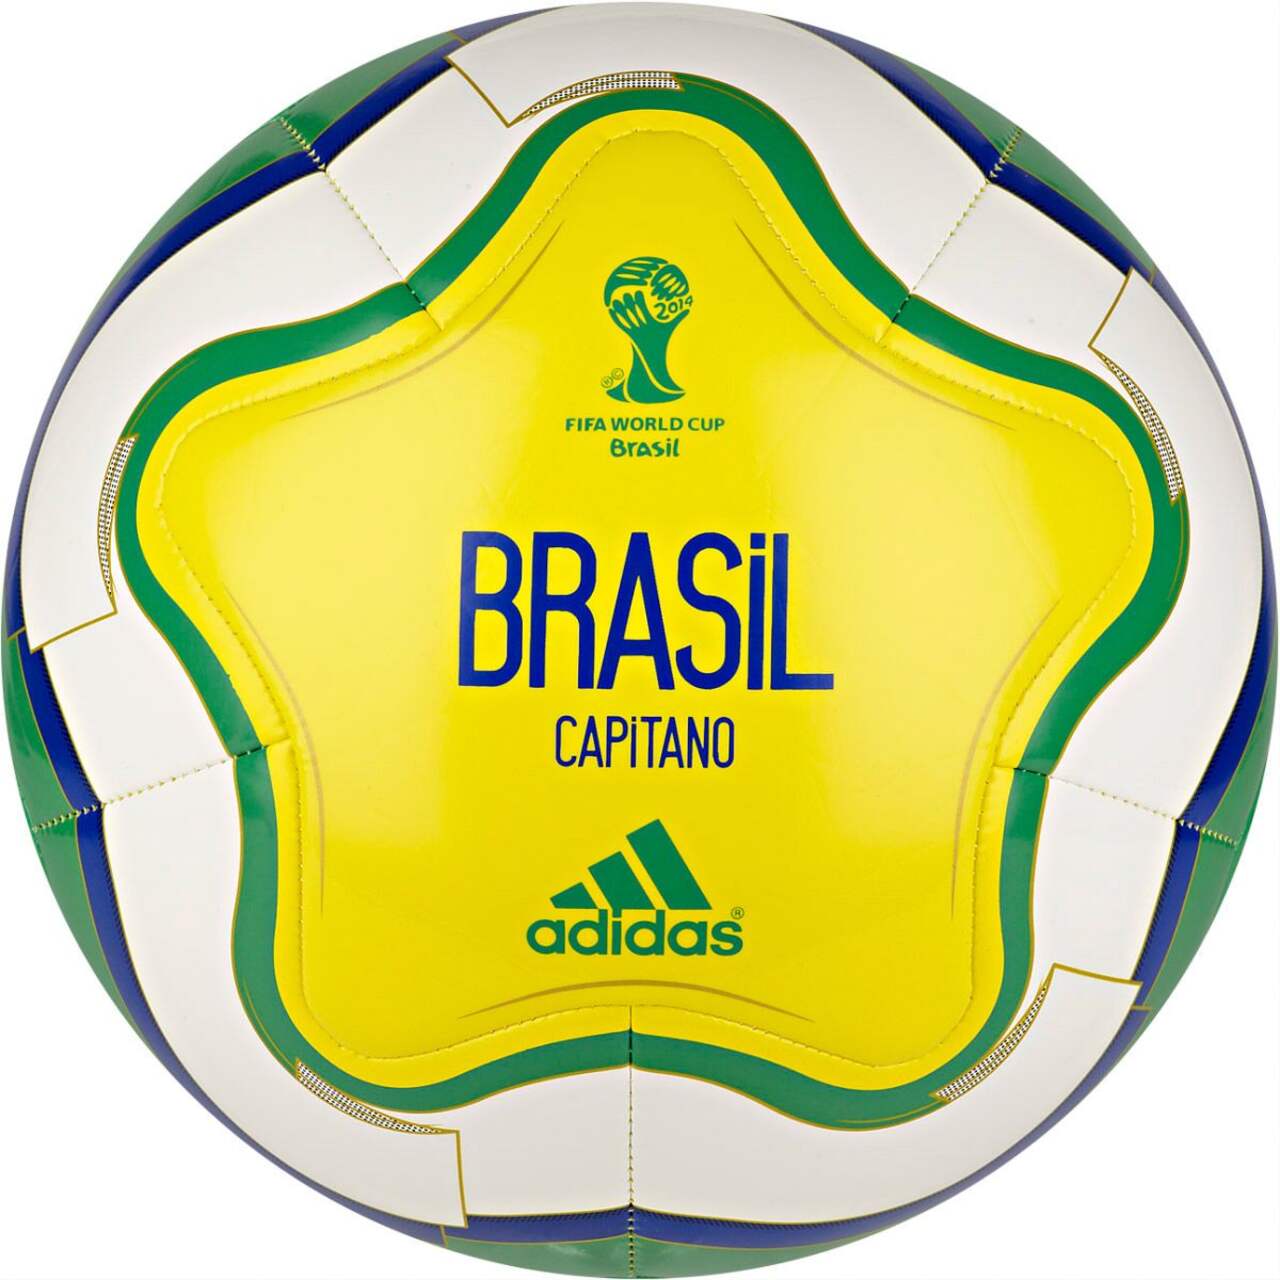 ADIDAS Brazuca Power Orange Official Match Ball, World Cup 2014 Soccer, size.5